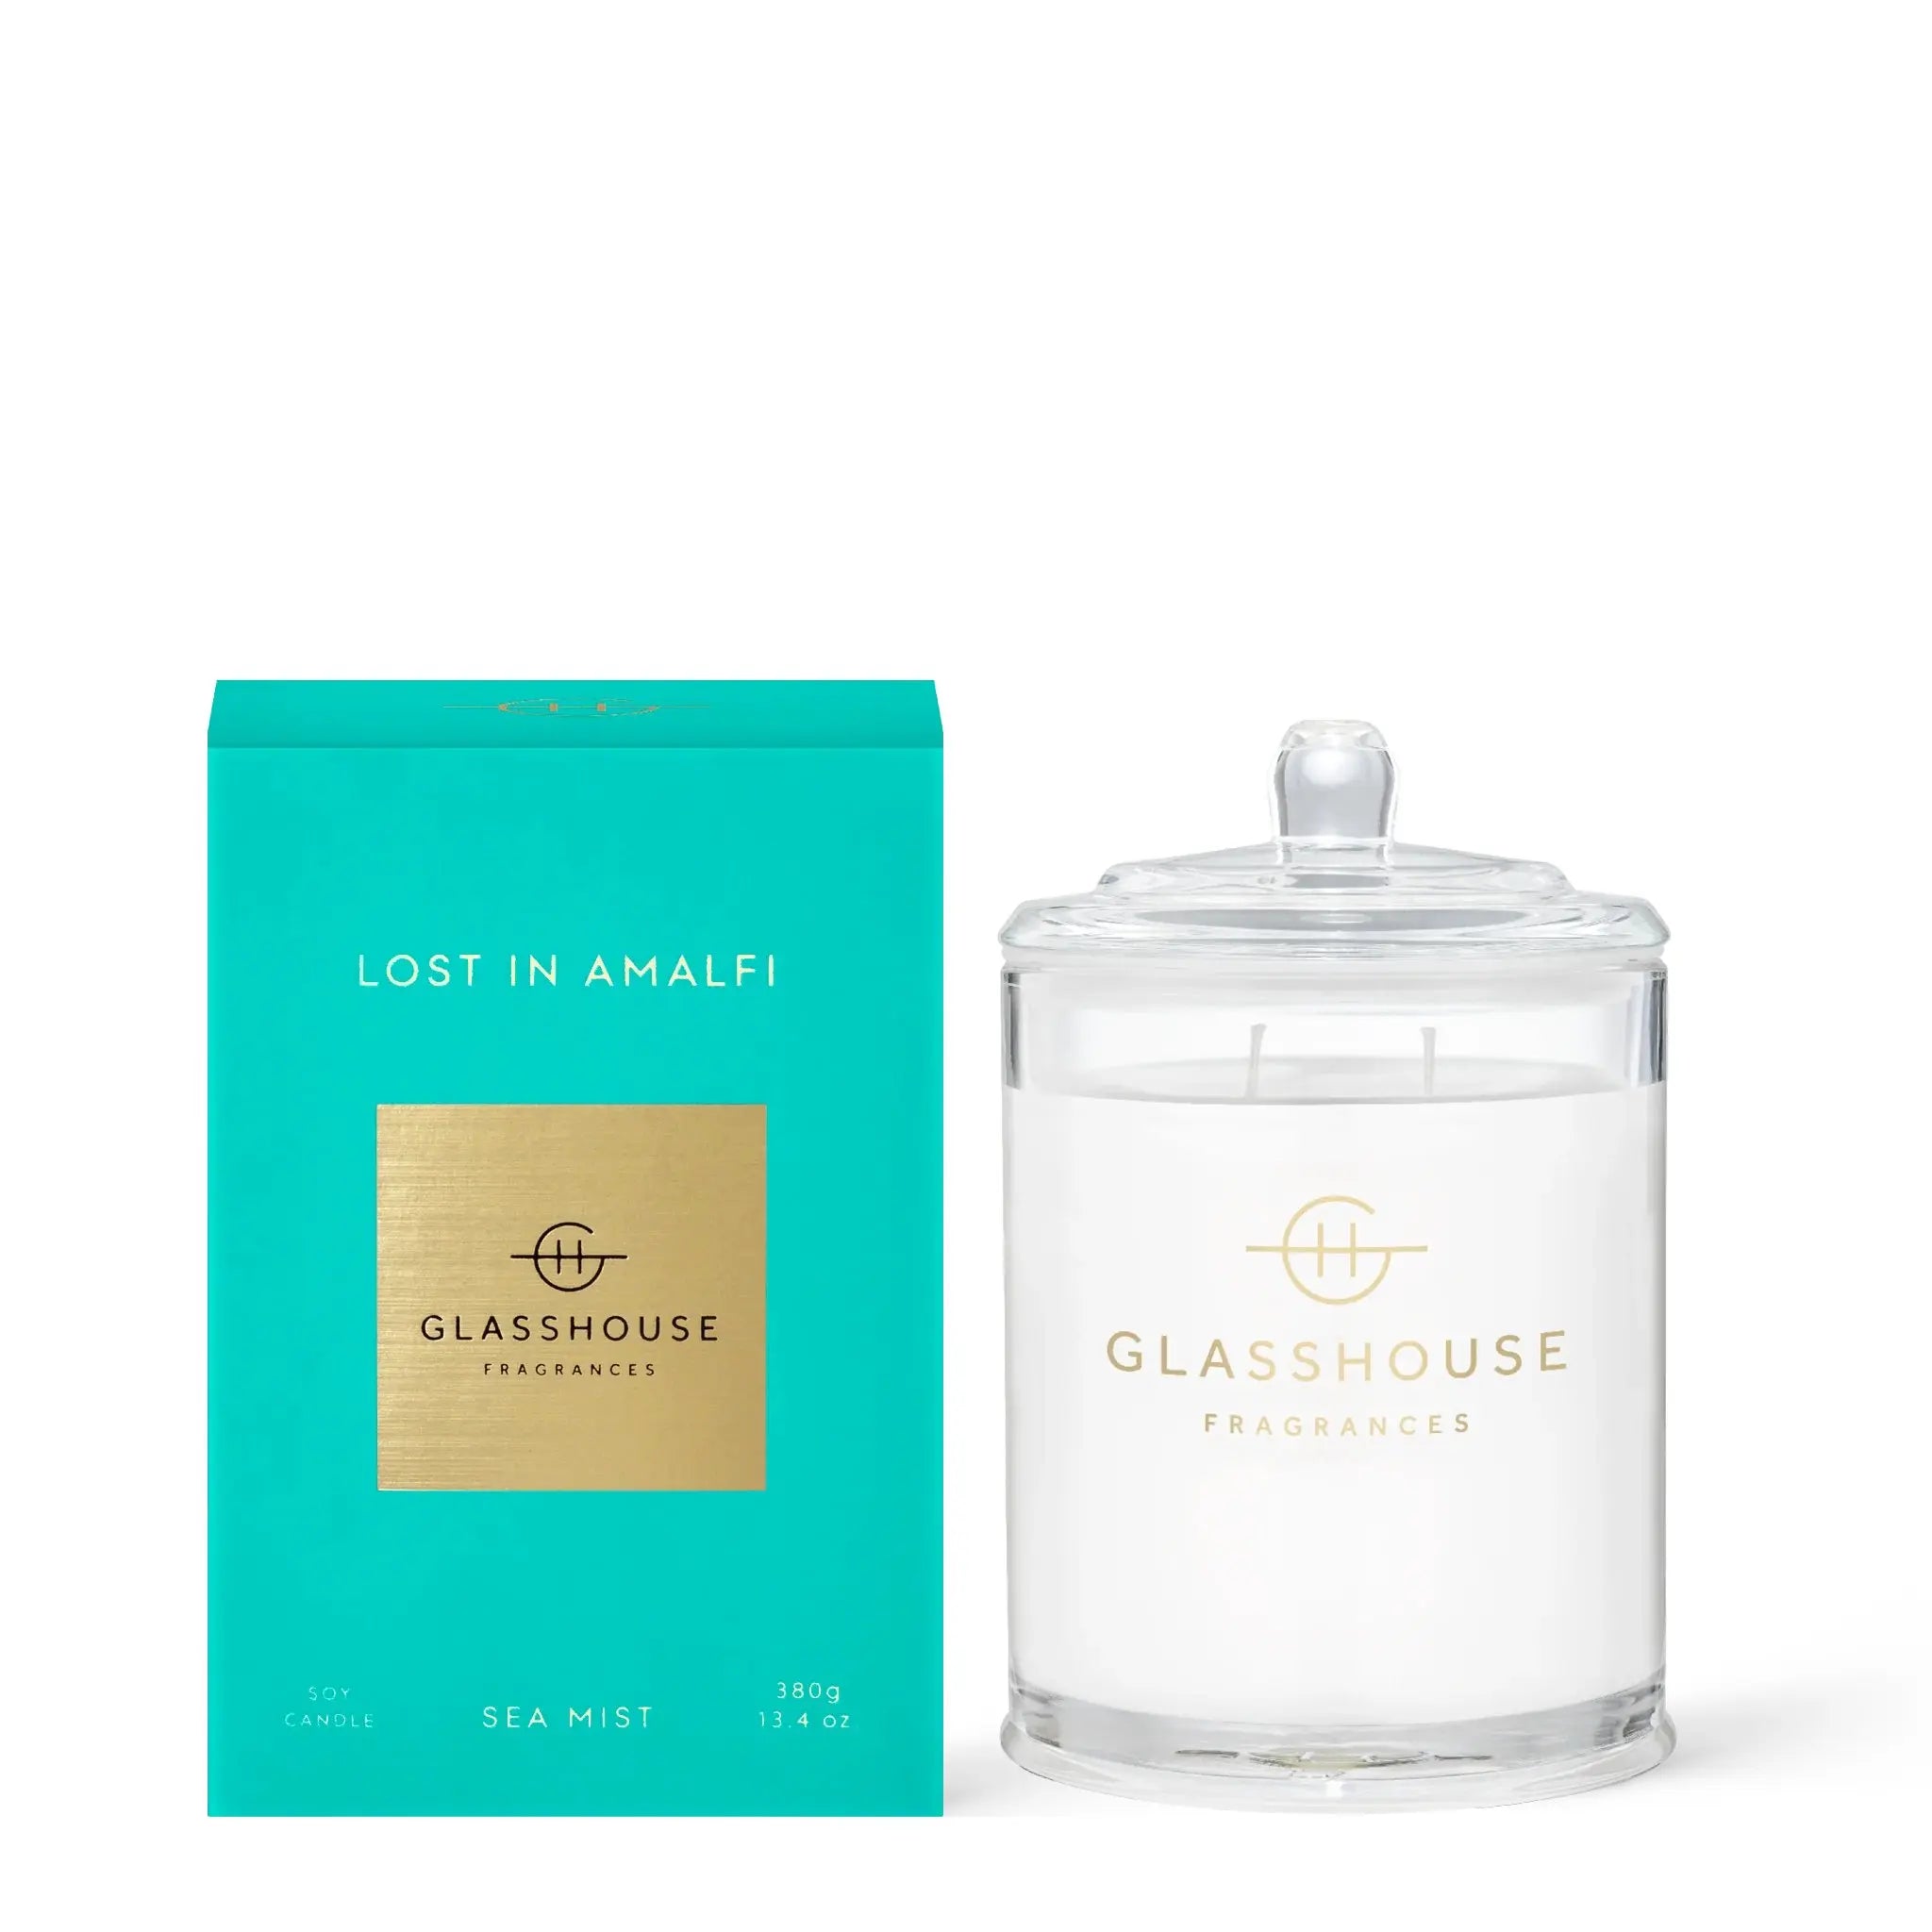 Glasshouse Fragrances Lost in Amalfi Soy Candle Sea Mist 380 grams 13.4 ounces